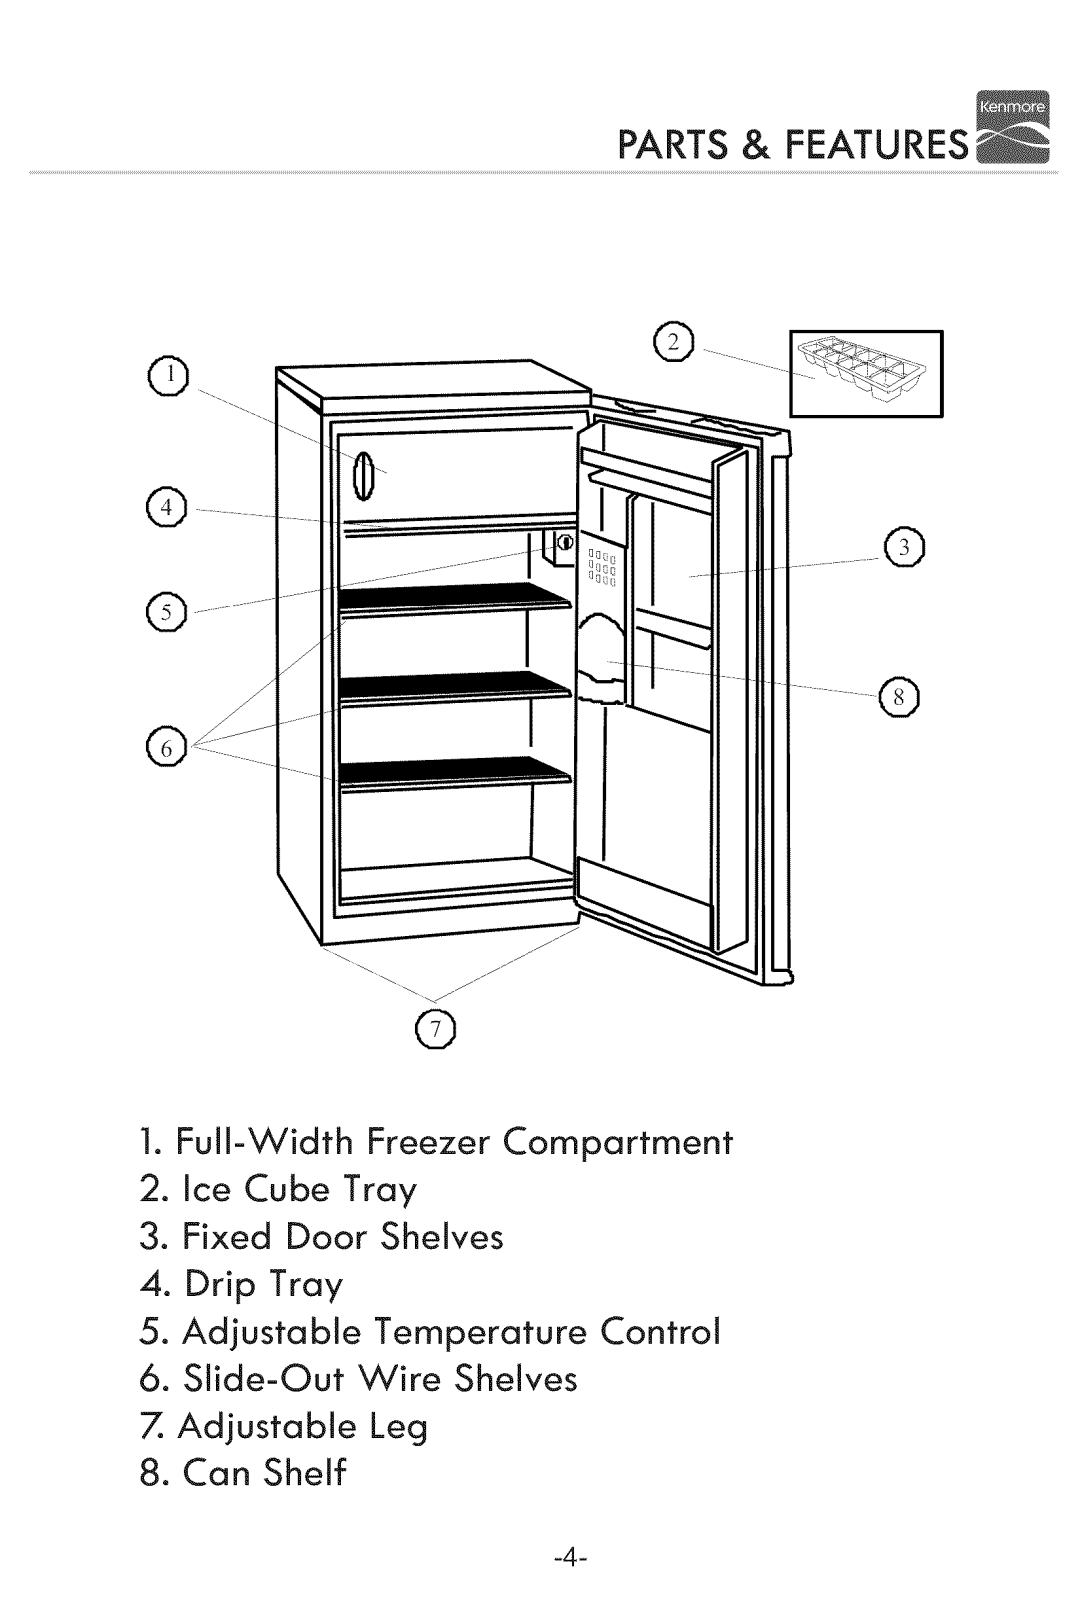 Kenmore 94683 Parts & Features, Full-WidthFreezer Compartment 2.Ice Cube Tray, Fixed Door Shelves 4.Drip Tray, Can Shelf 